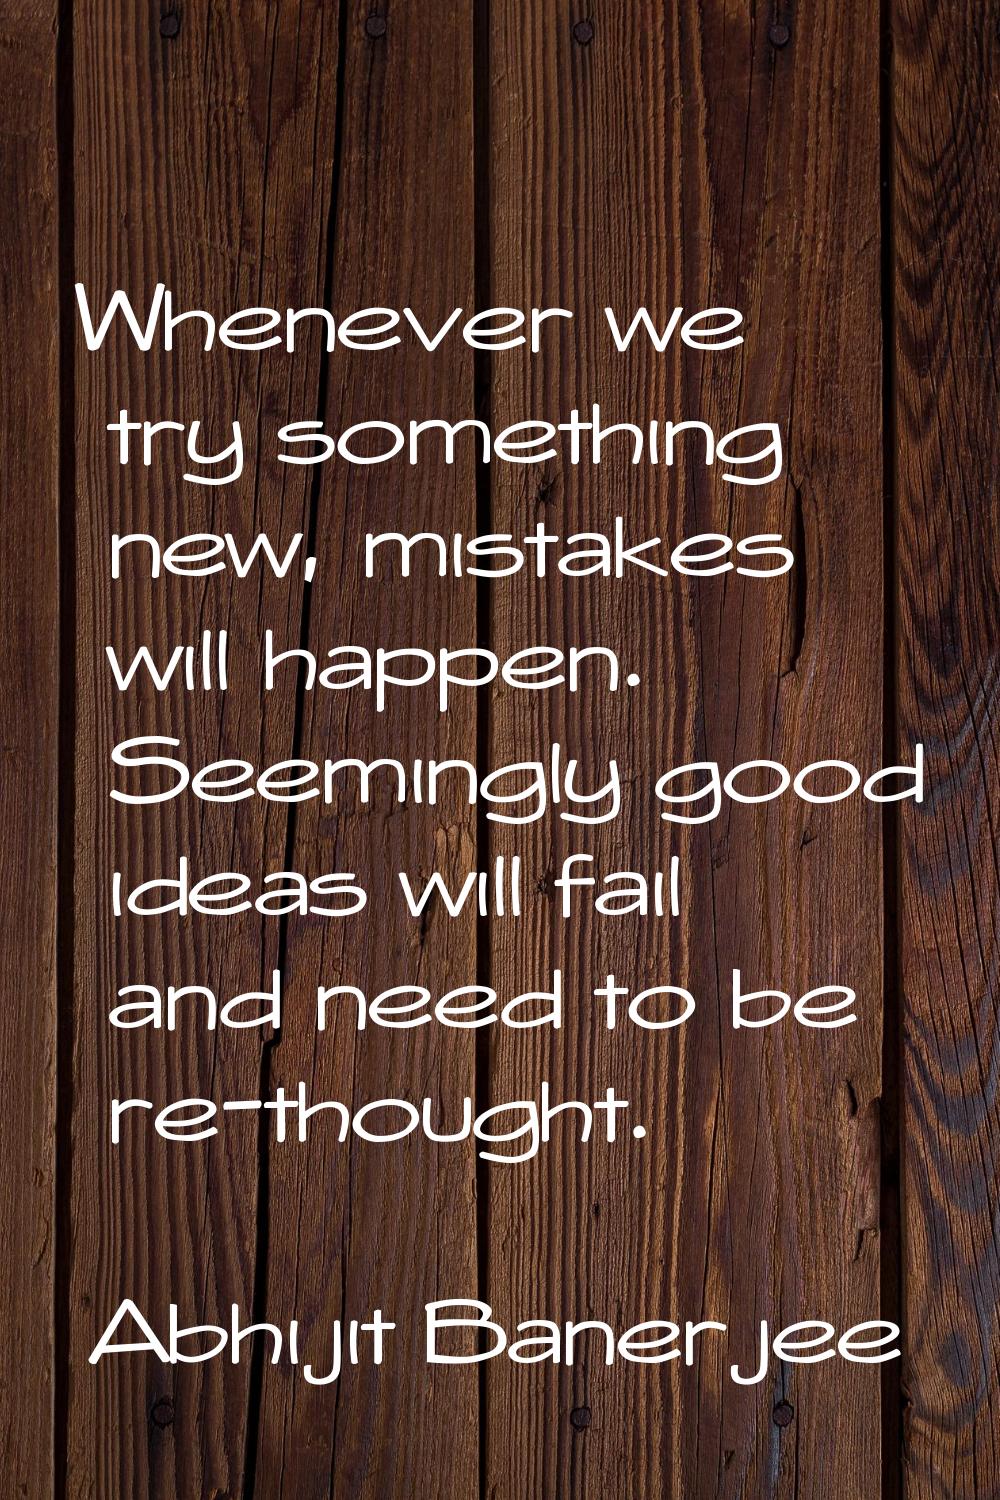 Whenever we try something new, mistakes will happen. Seemingly good ideas will fail and need to be 